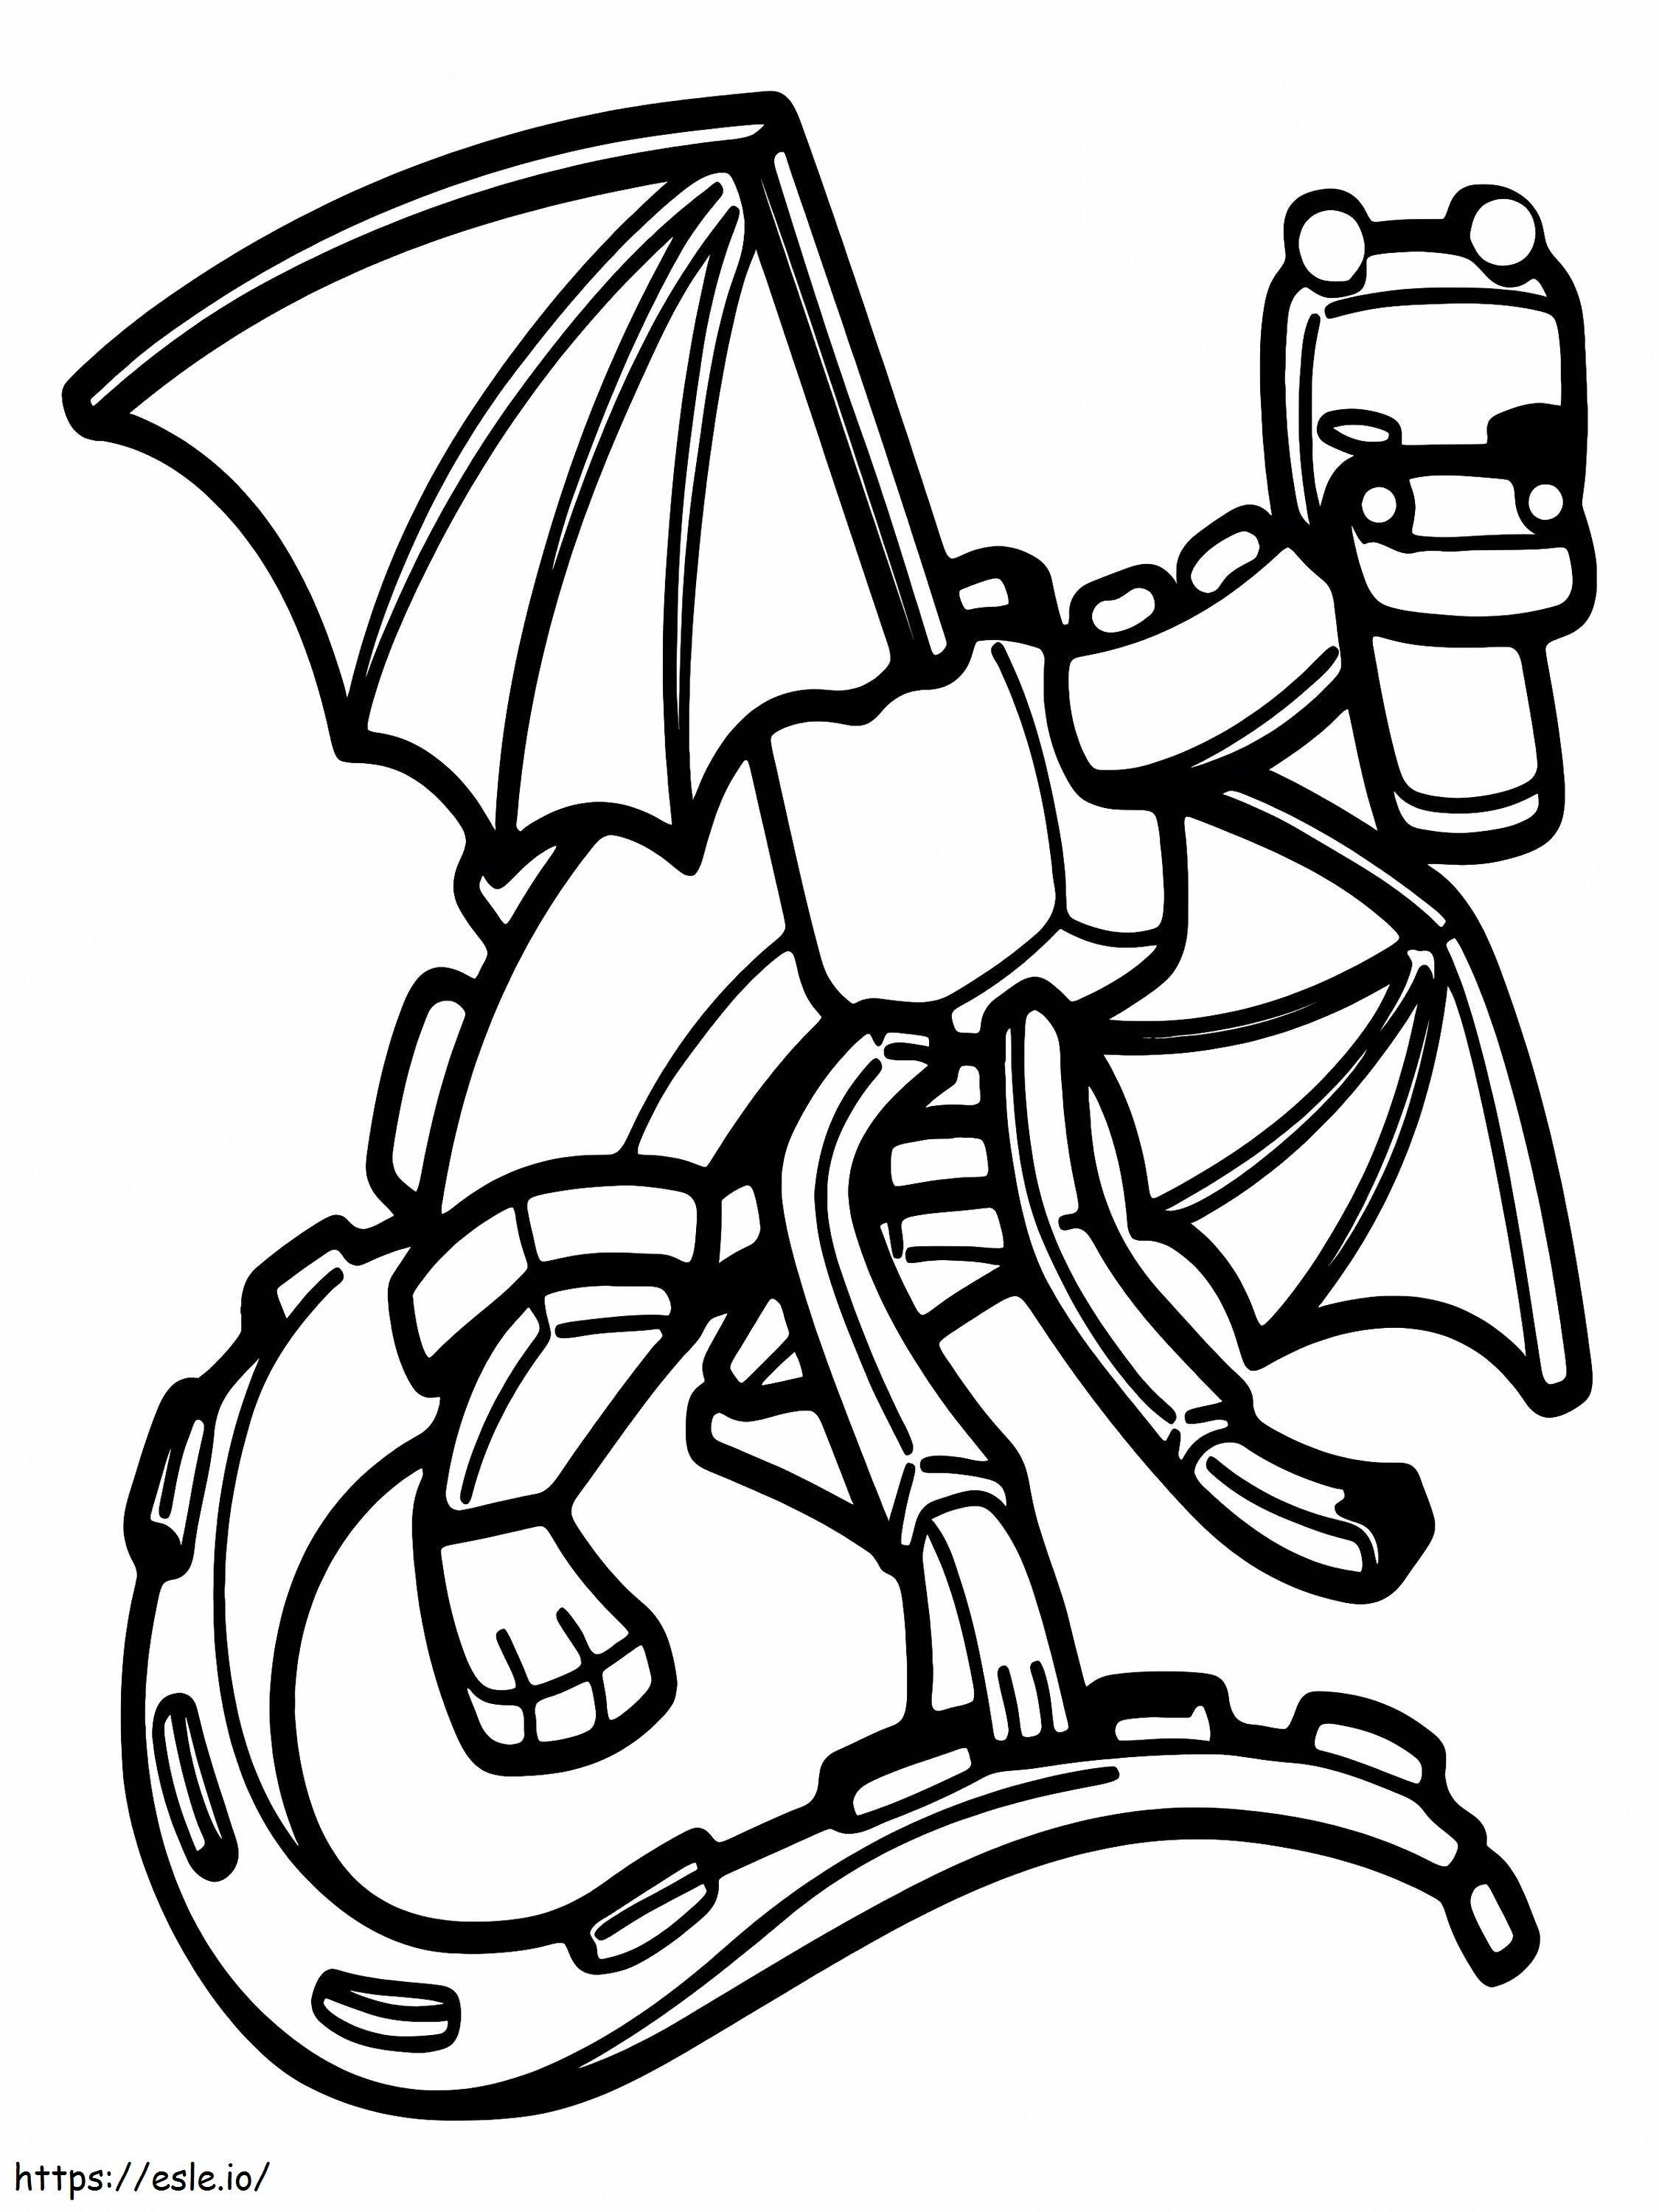 Minecraft Dragon Holding Its Tail coloring page